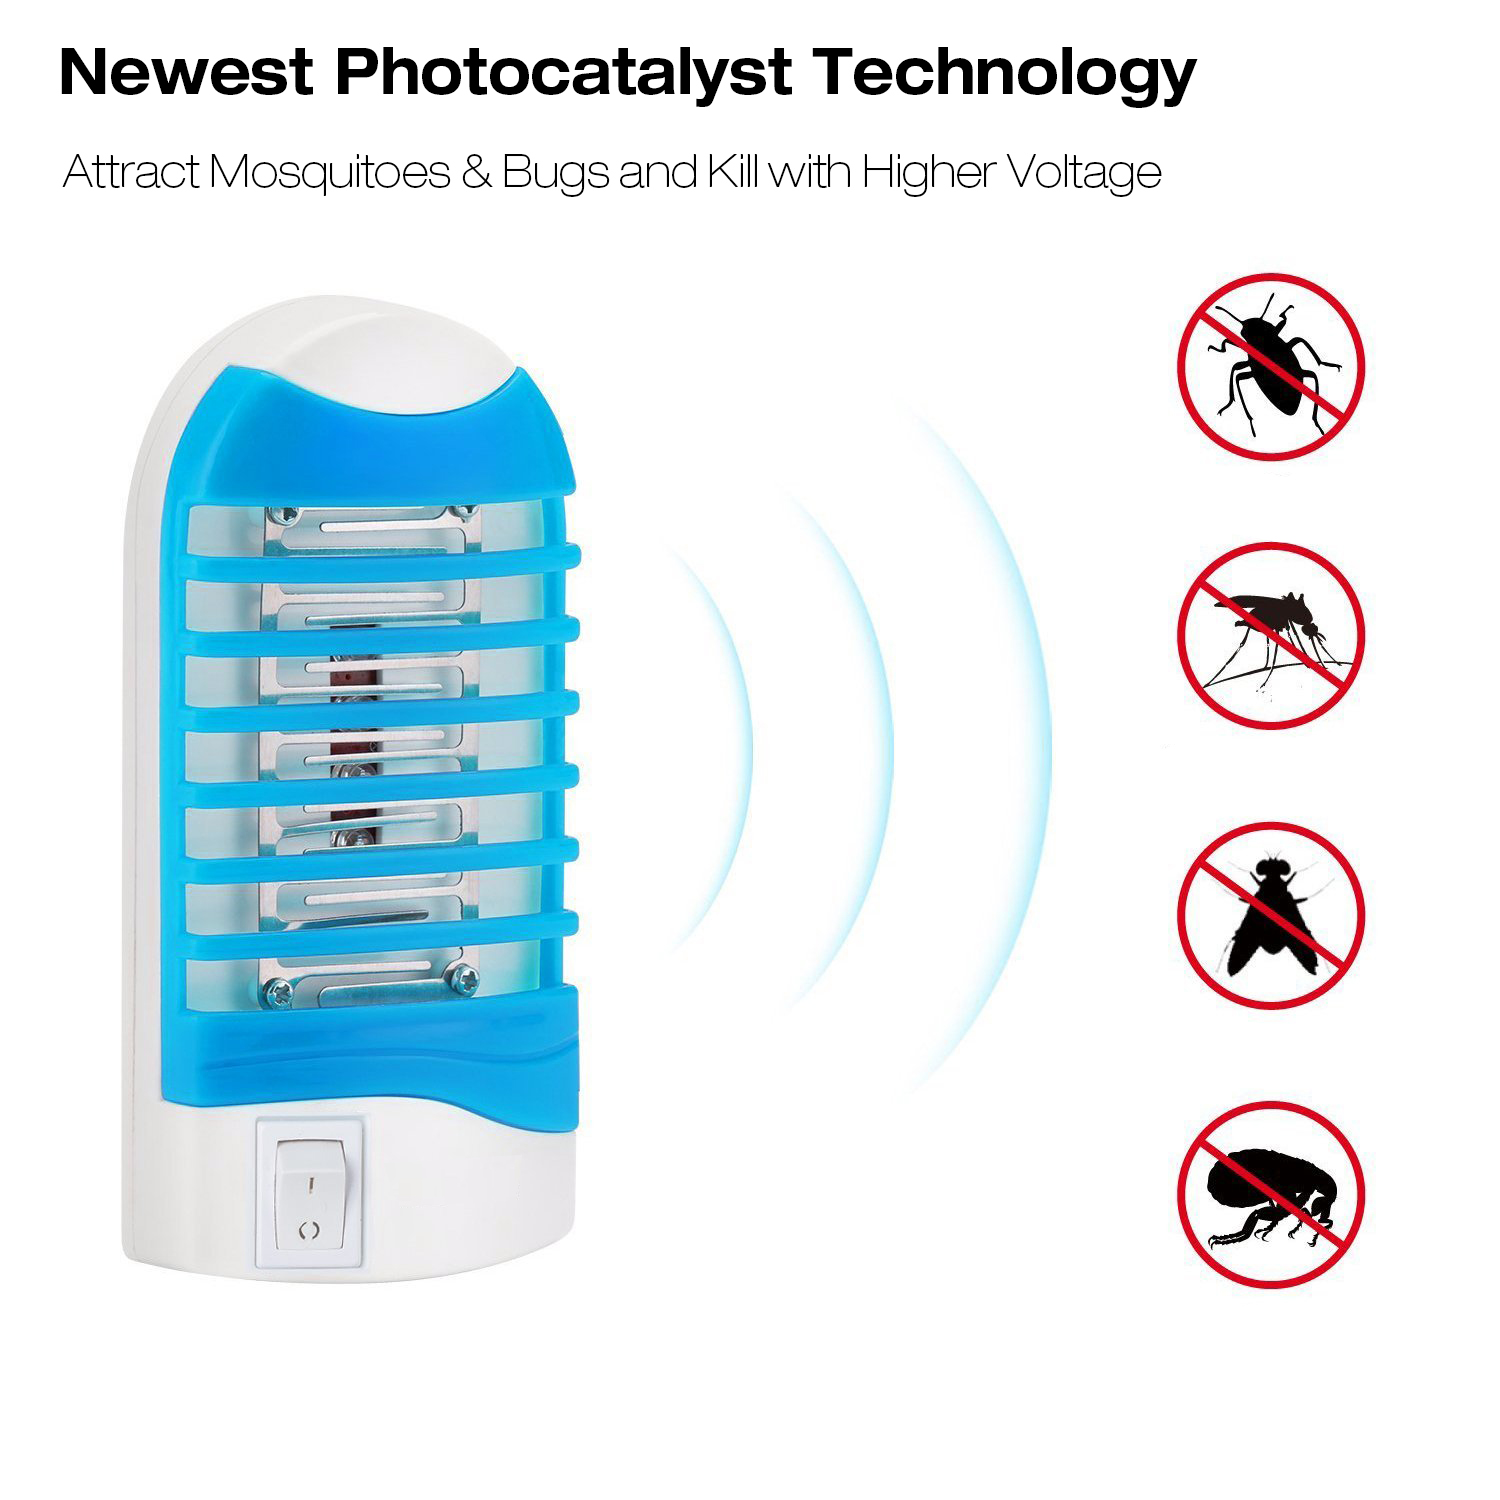 Loskii-HA-20-5th-Upgraded-Electronic-Plug-in-Bug-Zapper-Pest-Killer-Insect-Trap-Mosquito-Killer-Lamp-1256739